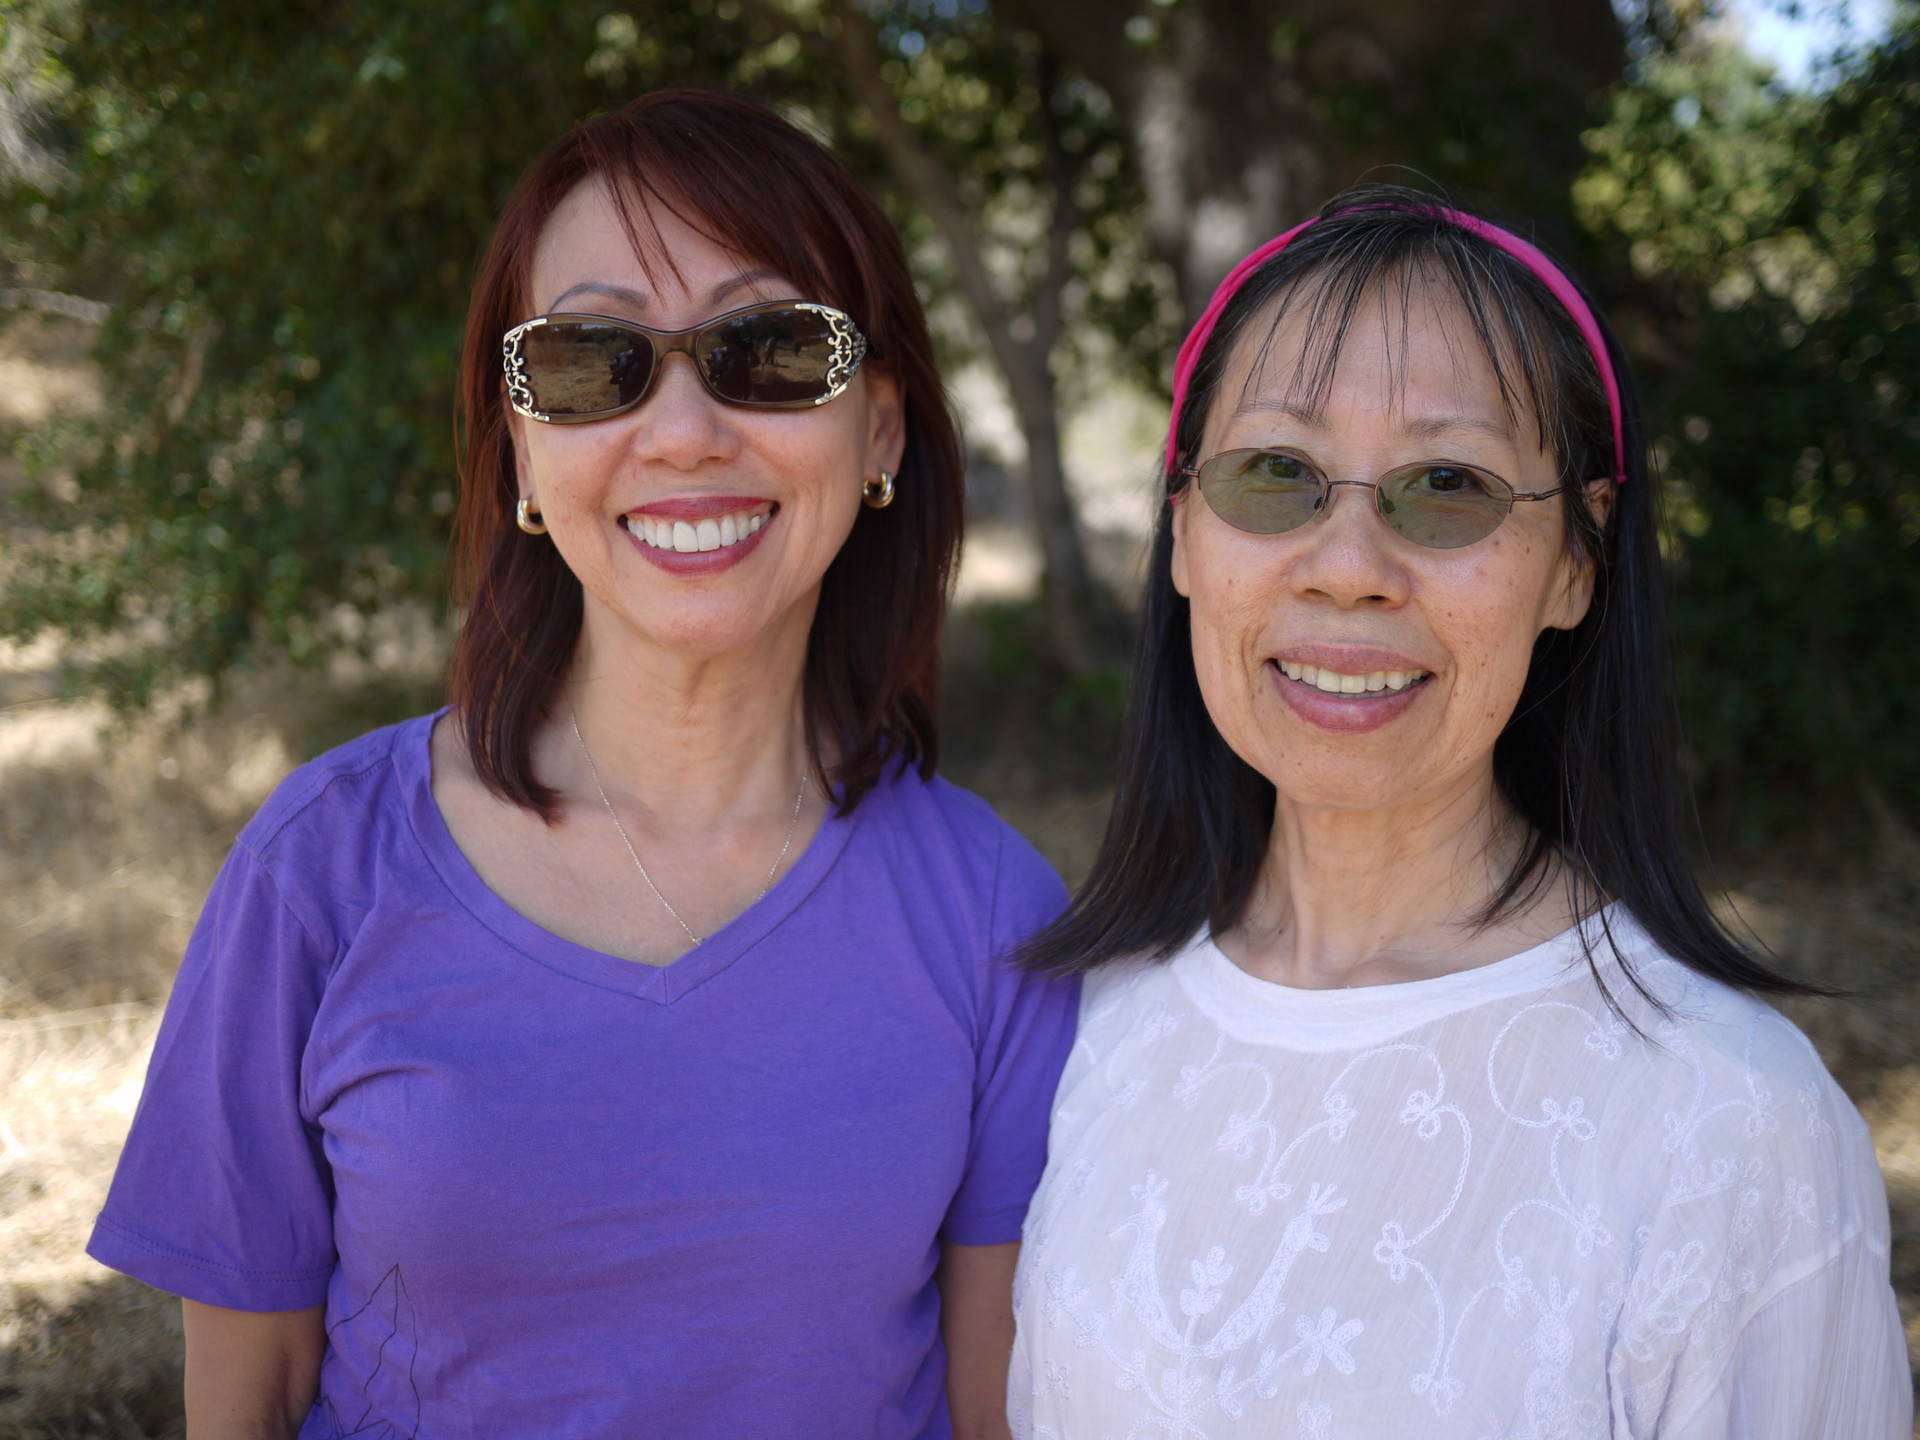 Sisters Evelyn and Jessica Kheo arrived at Camp Pendleton from Vietnam when they were teenagers. Suzie Racho/KQED